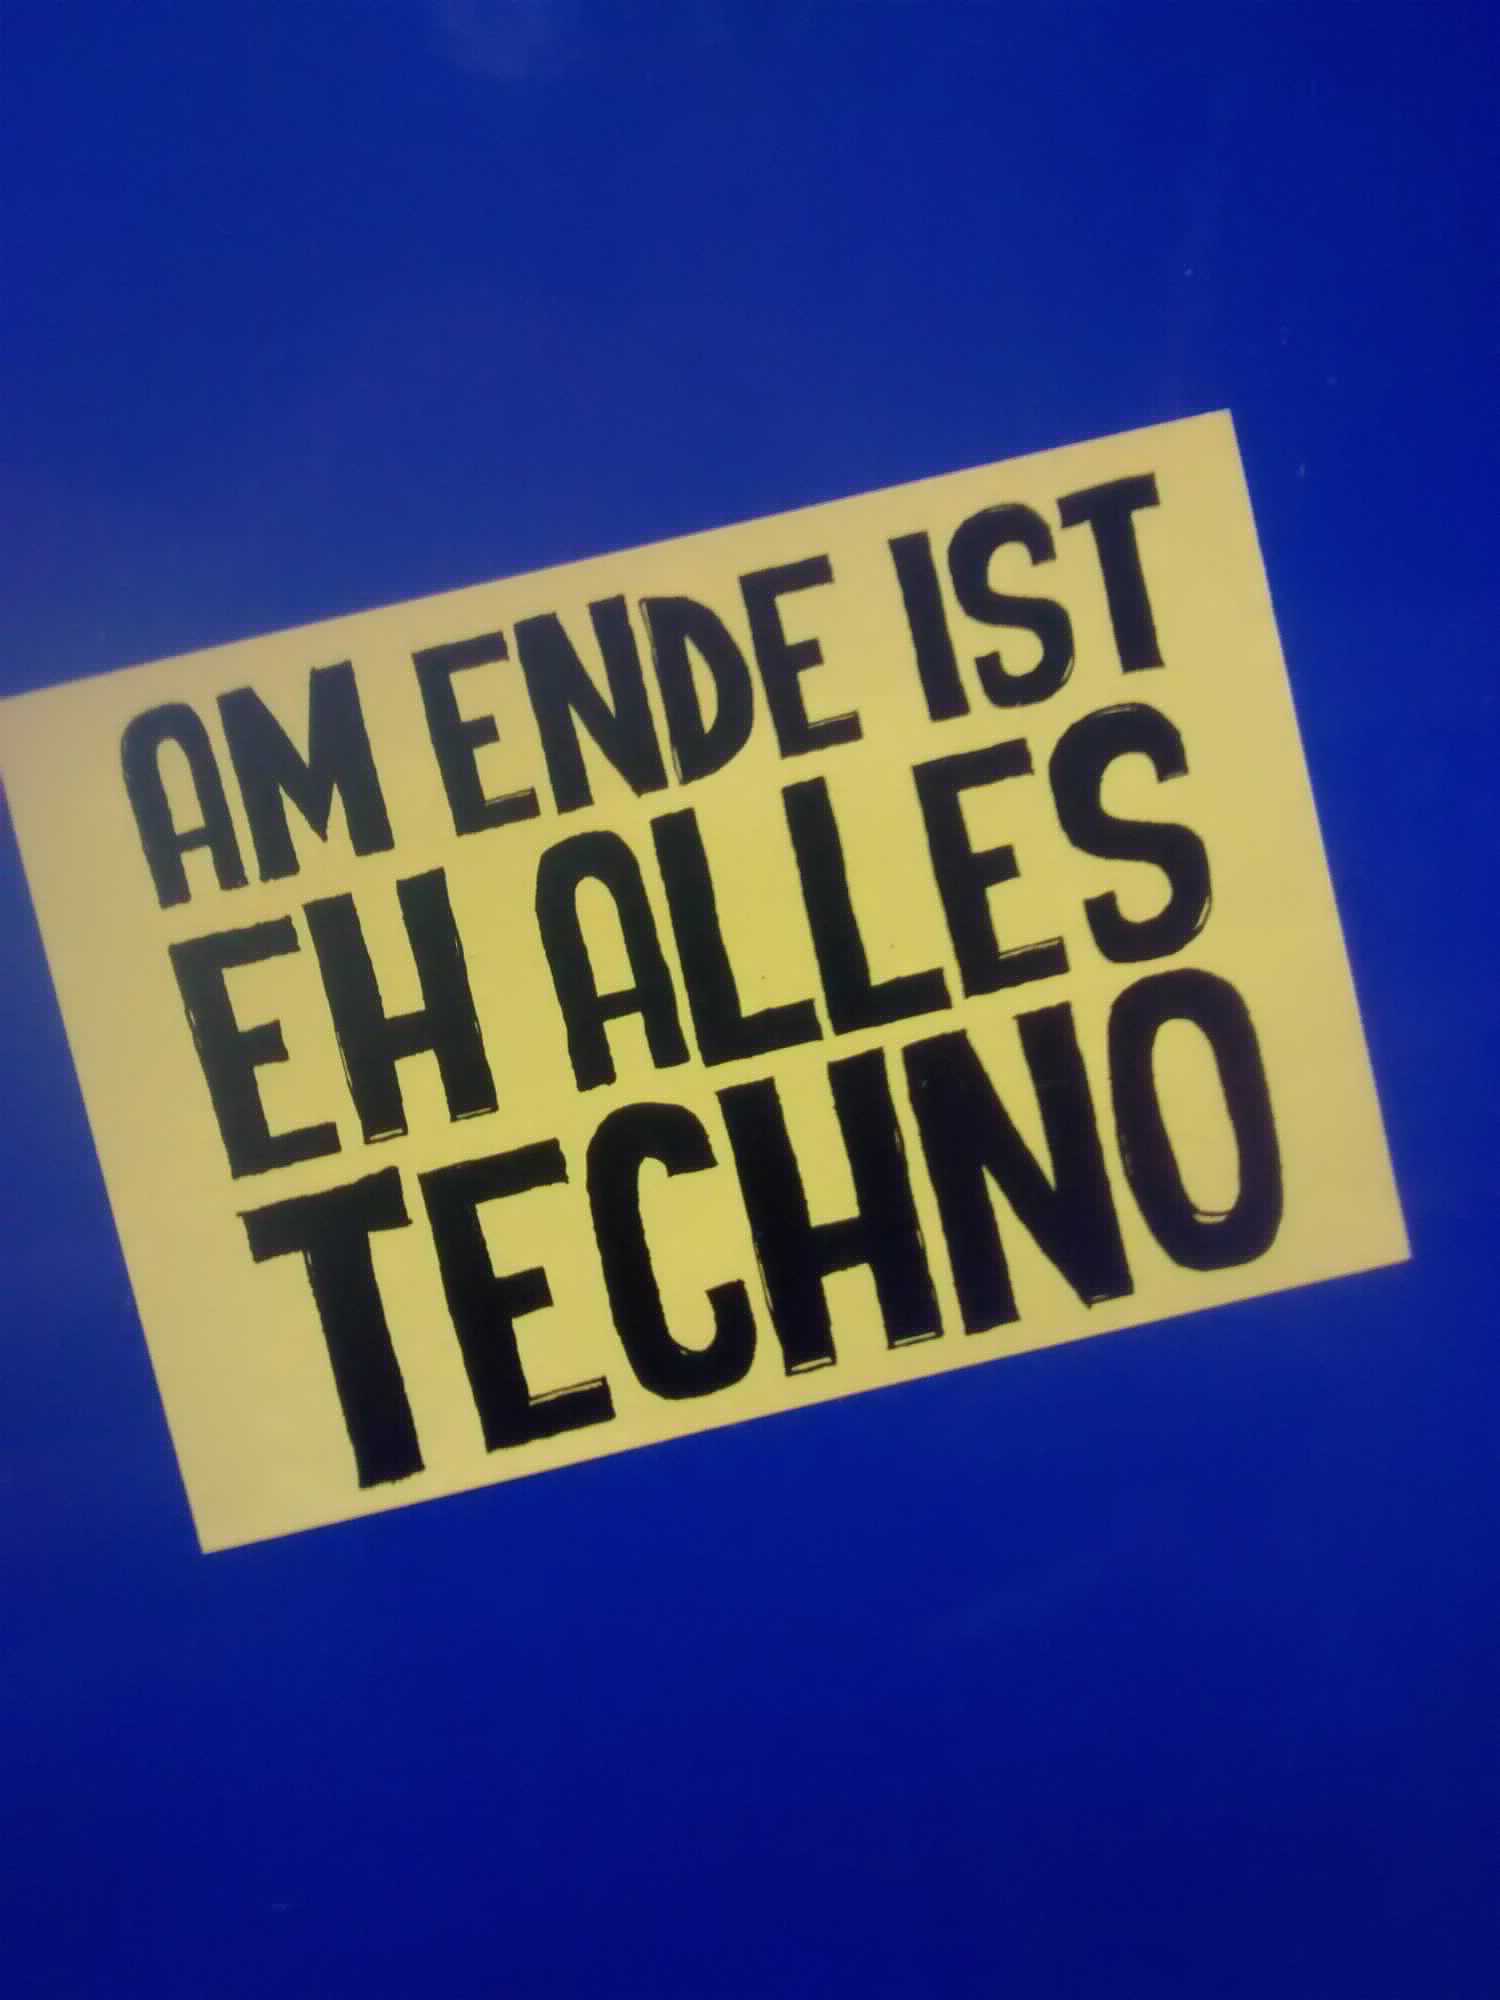 Am Ende is eh alles Techno